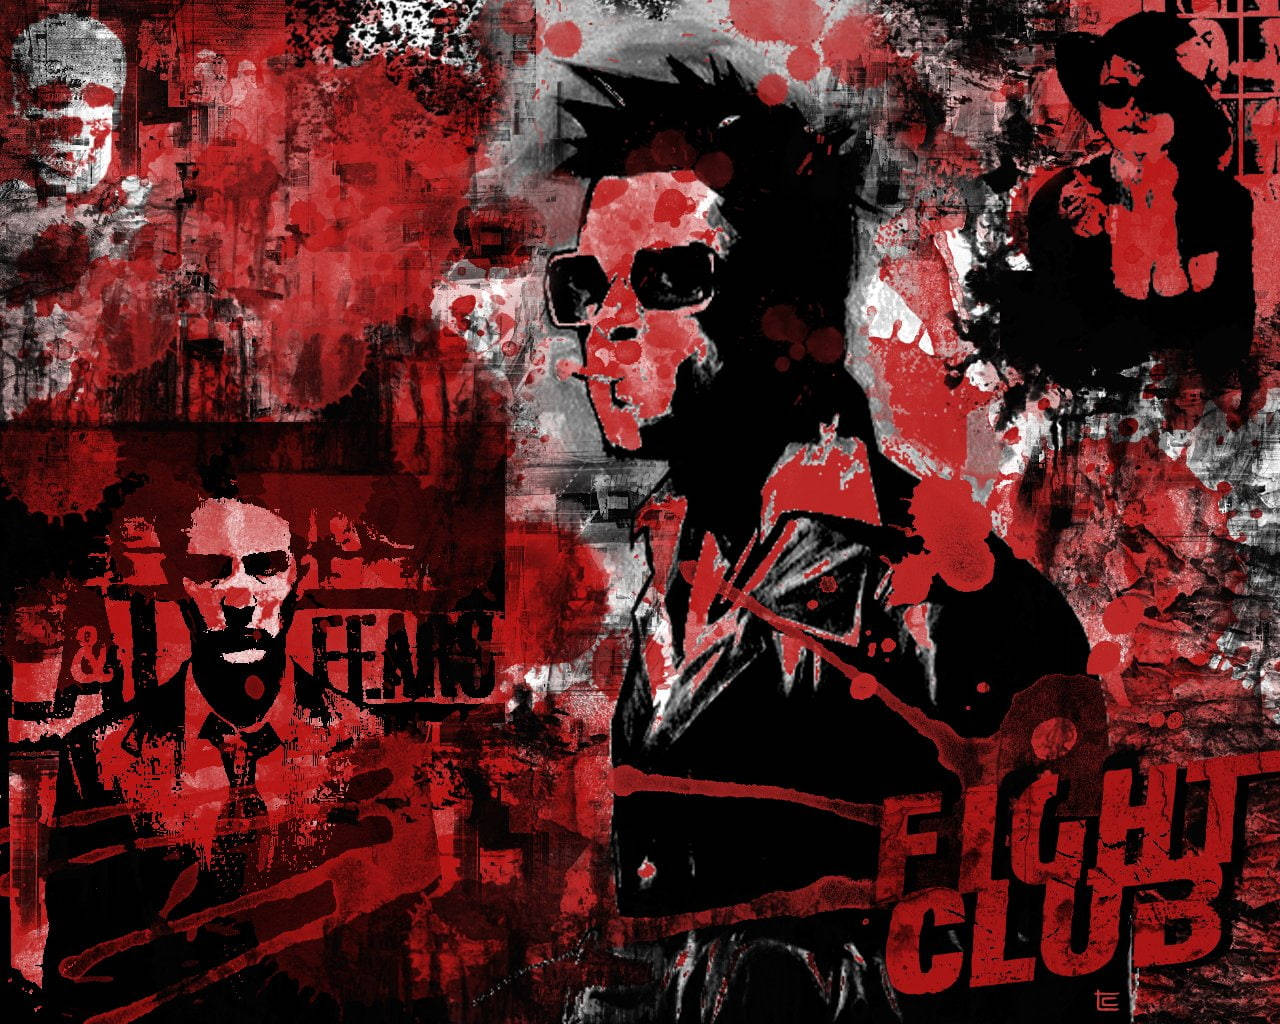 Free Fight Club Wallpaper Downloads, [100+] Fight Club Wallpapers for FREE  